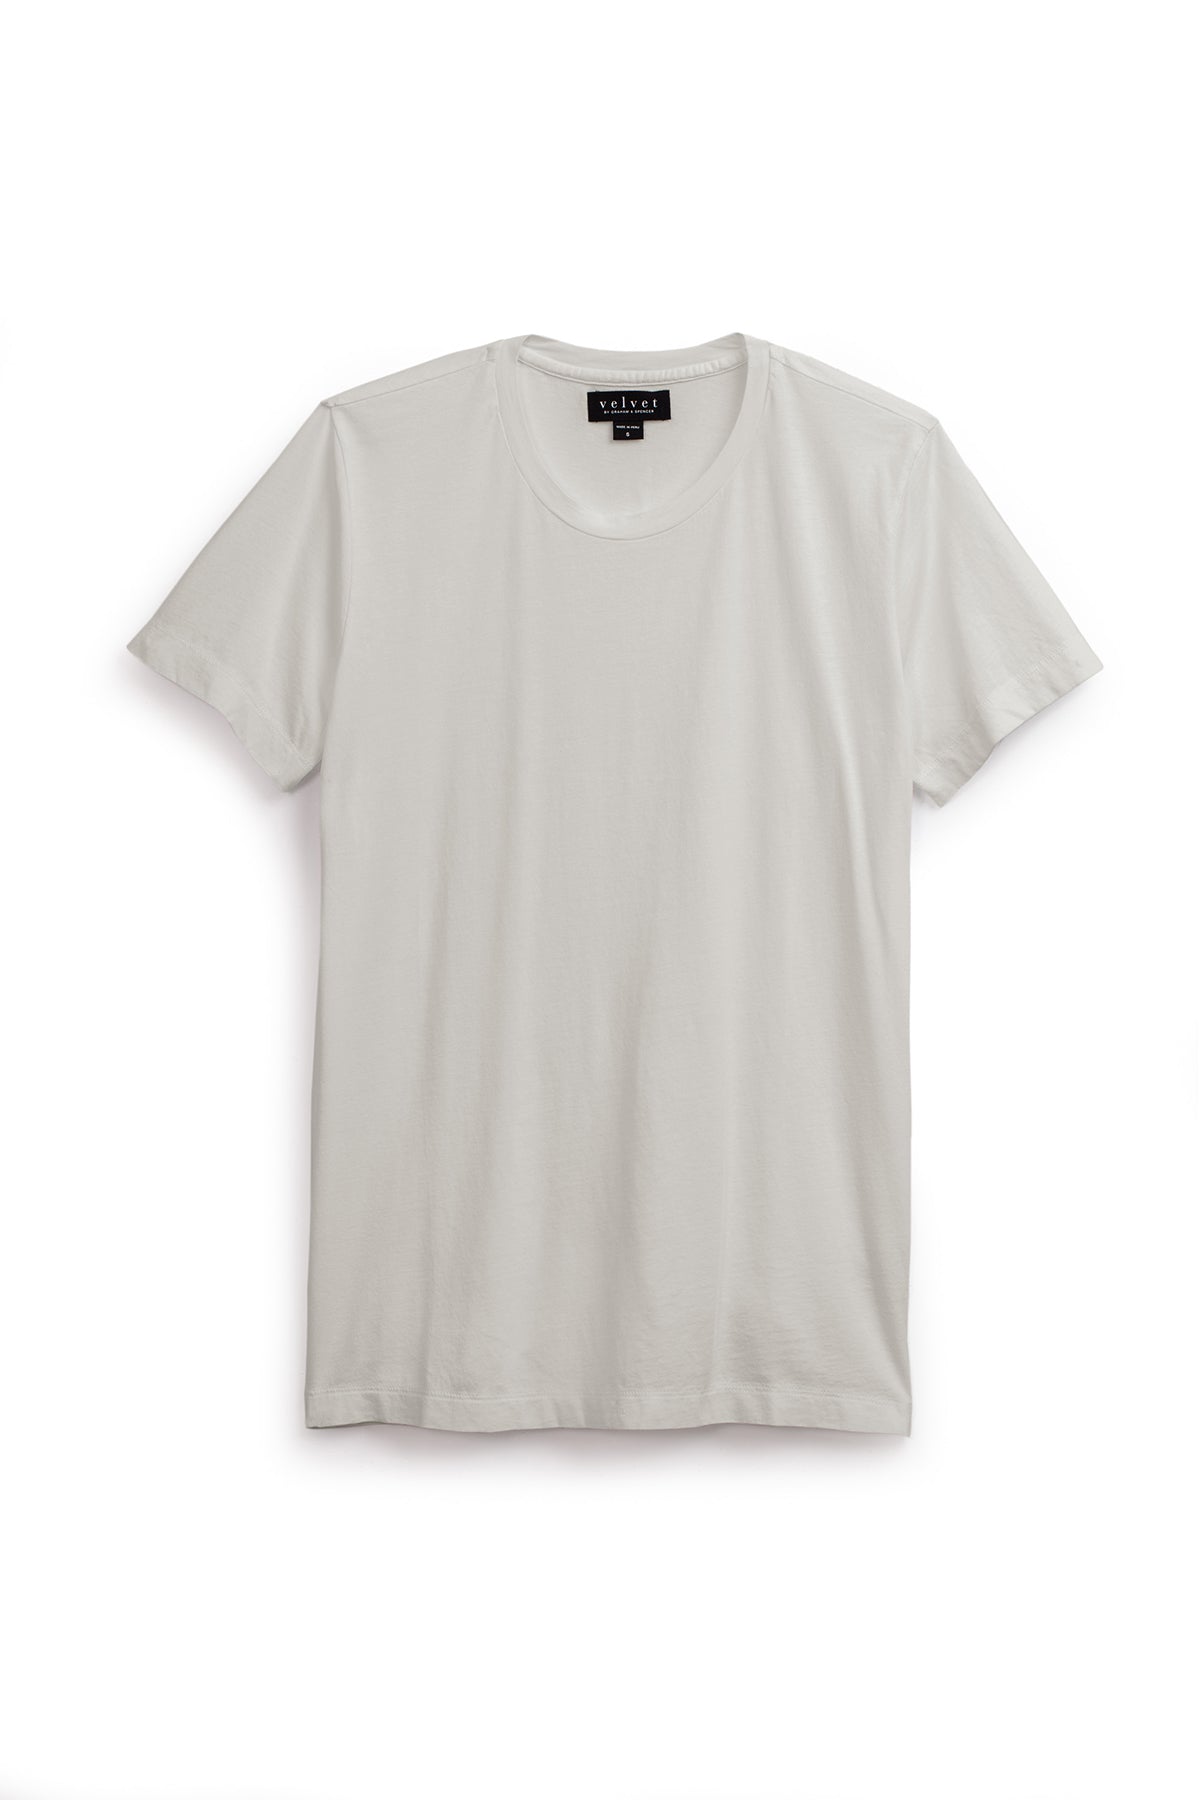 Howard short sleeve crew neck tee in cement flat lay view-35782847725761